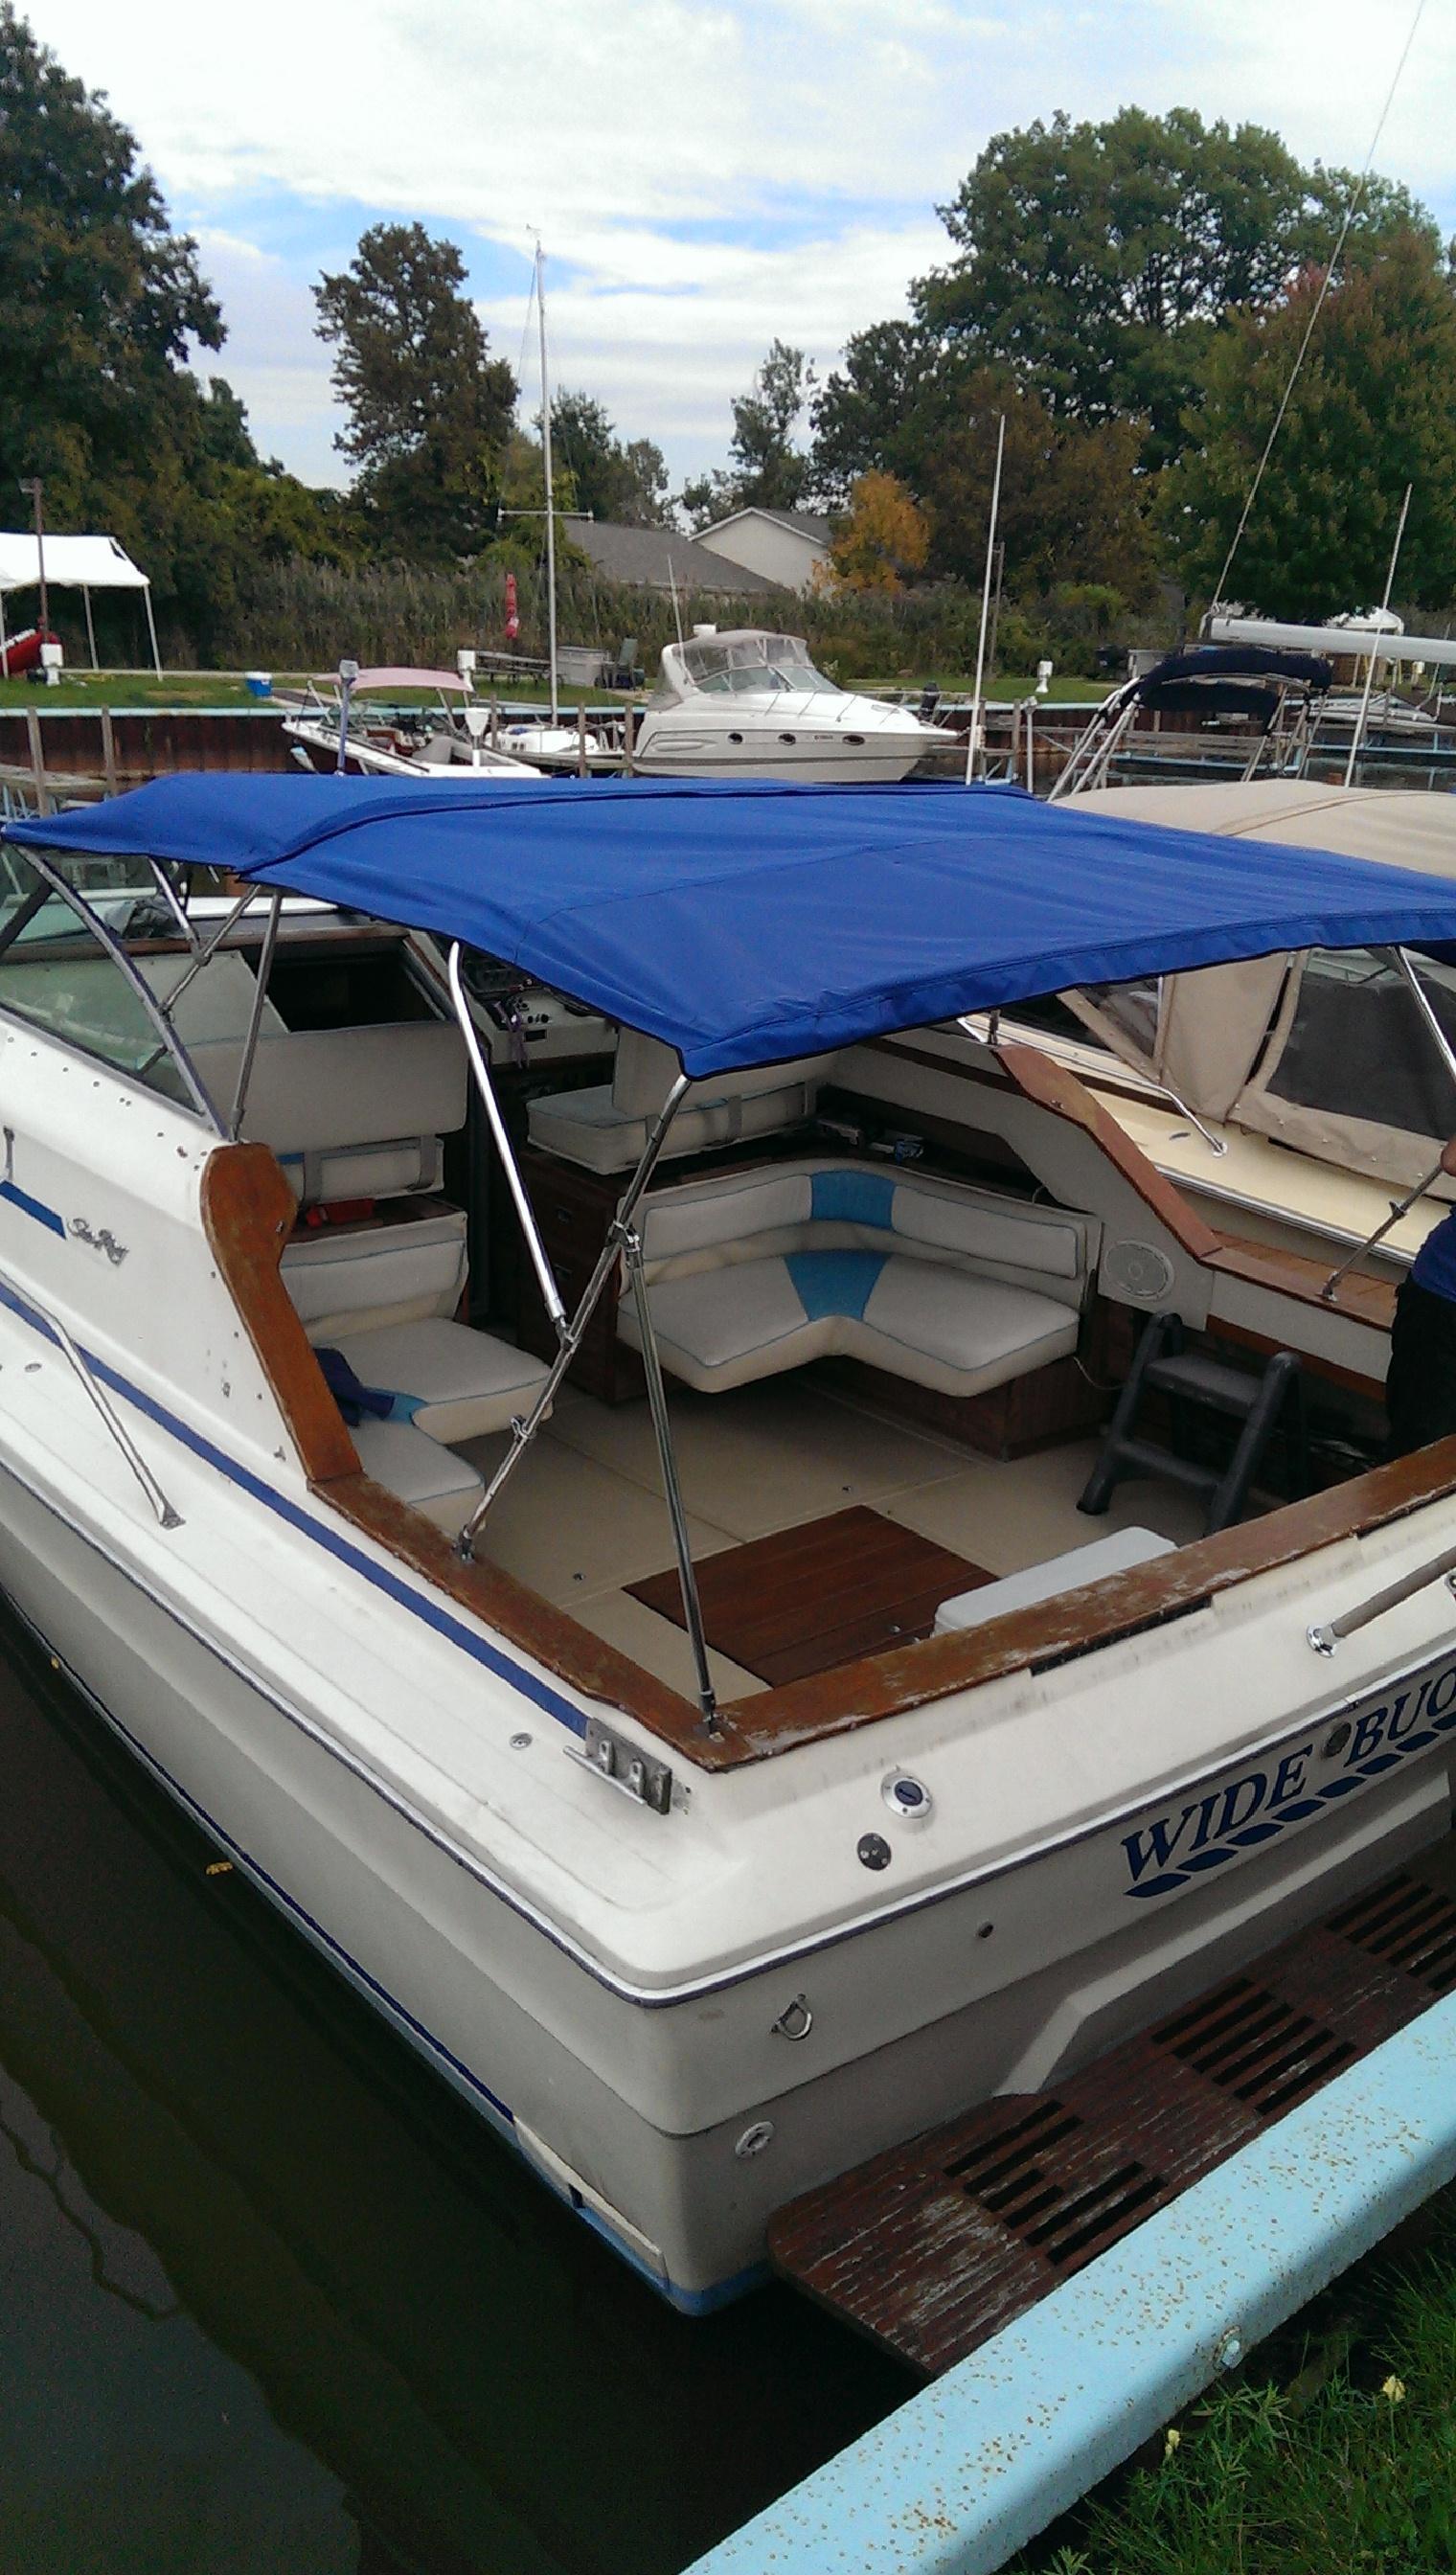 Sea Ray 300 Express, Painesville